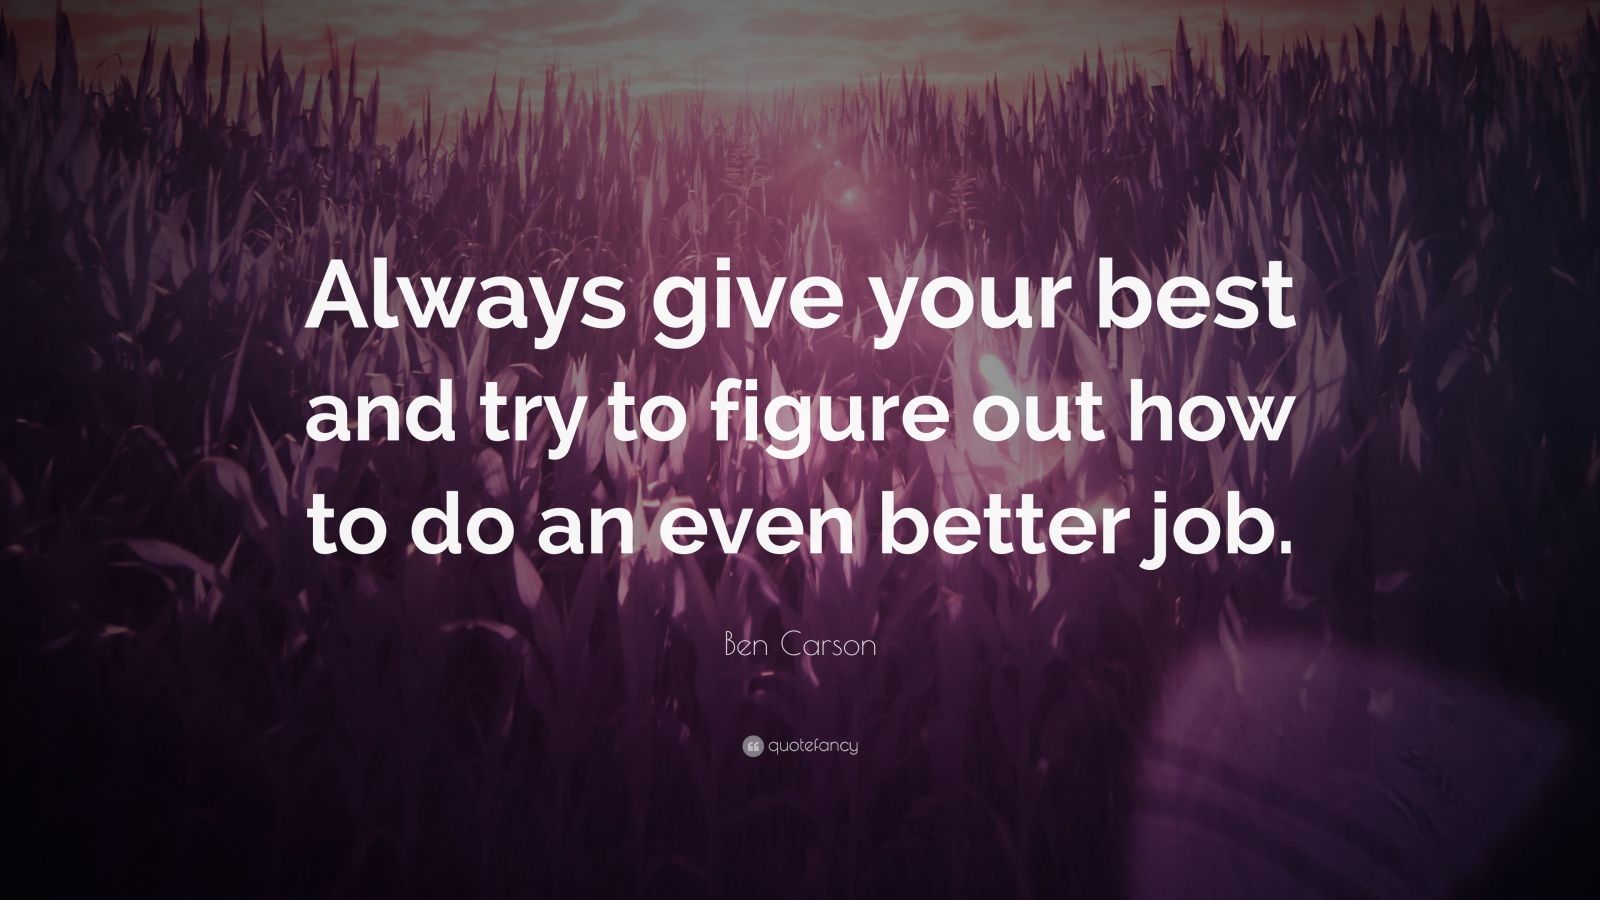 Ben Carson Quote: "Always give your best and try to figure out how to do an even better job ...